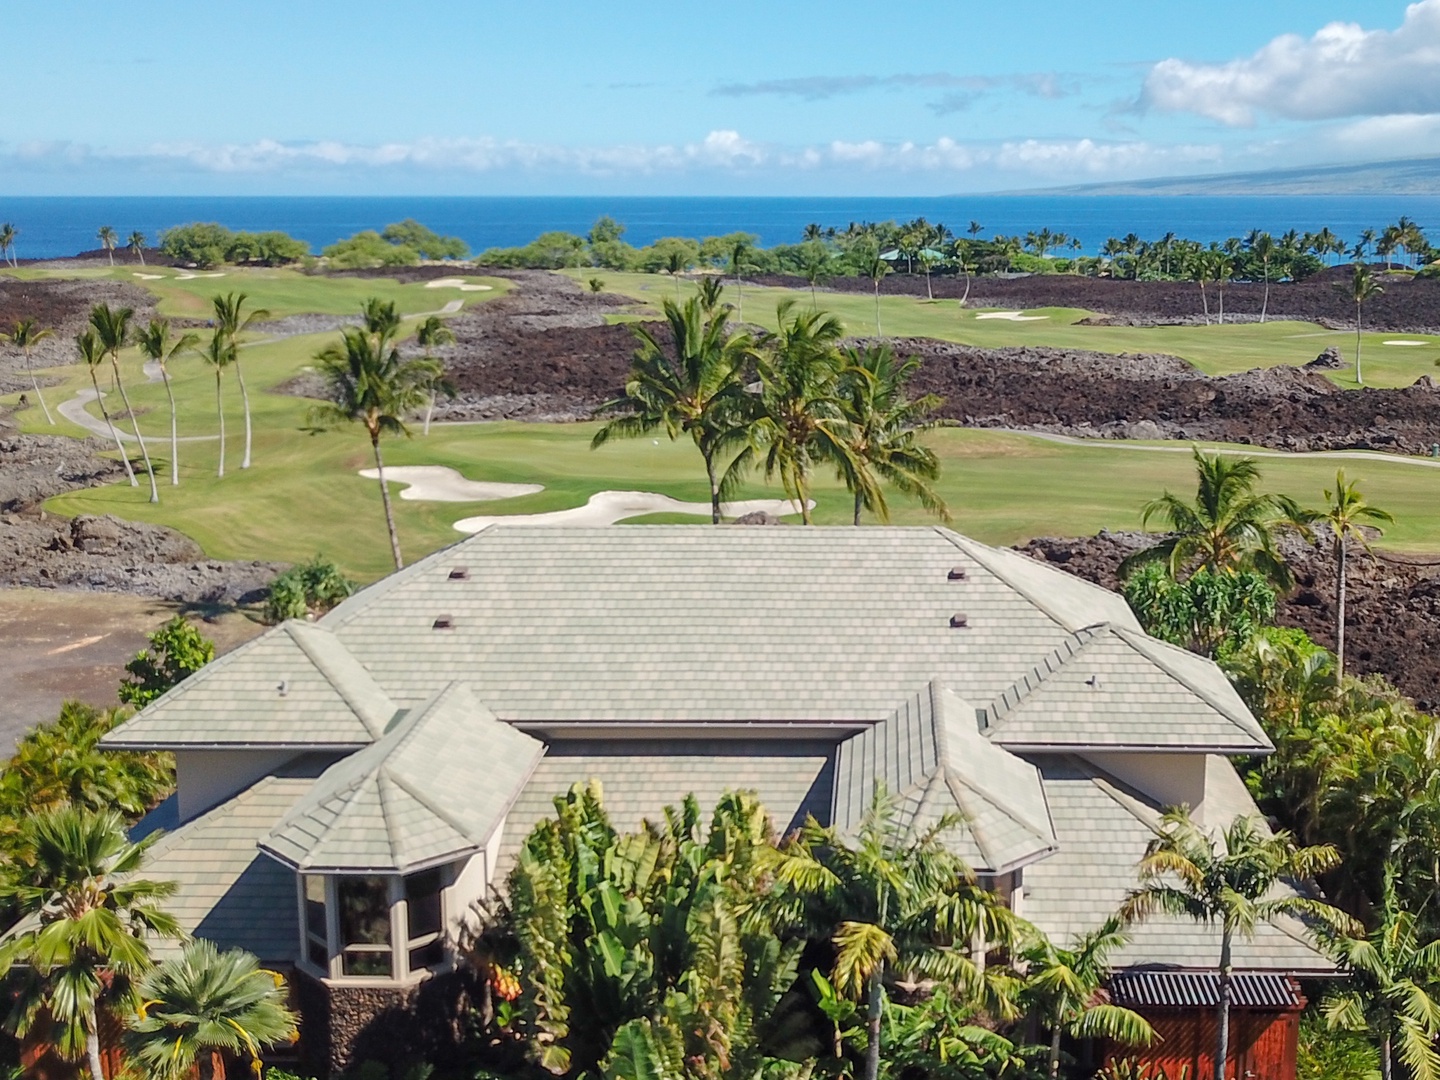 Kamuela Vacation Rentals, 3BD OneOcean (1C) at Mauna Lani Resort - House Surrounded by the Manicured Greens of the Mauna Lani Course, just Minutes from the Ocean and Beach Club